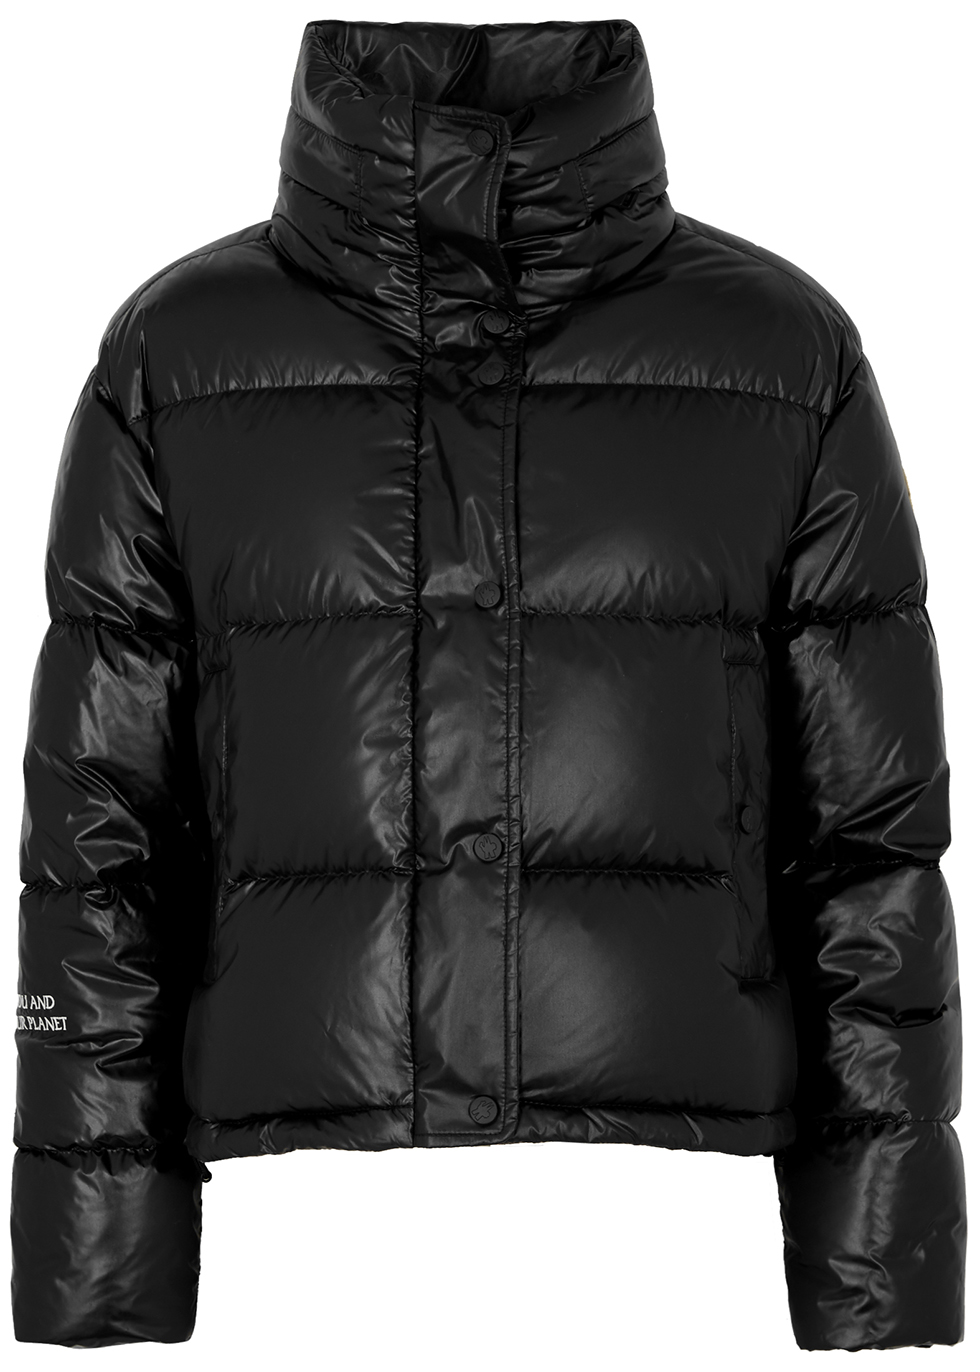 Moncler Synthetic Damgan Jacket in Black Womens Clothing Jackets 